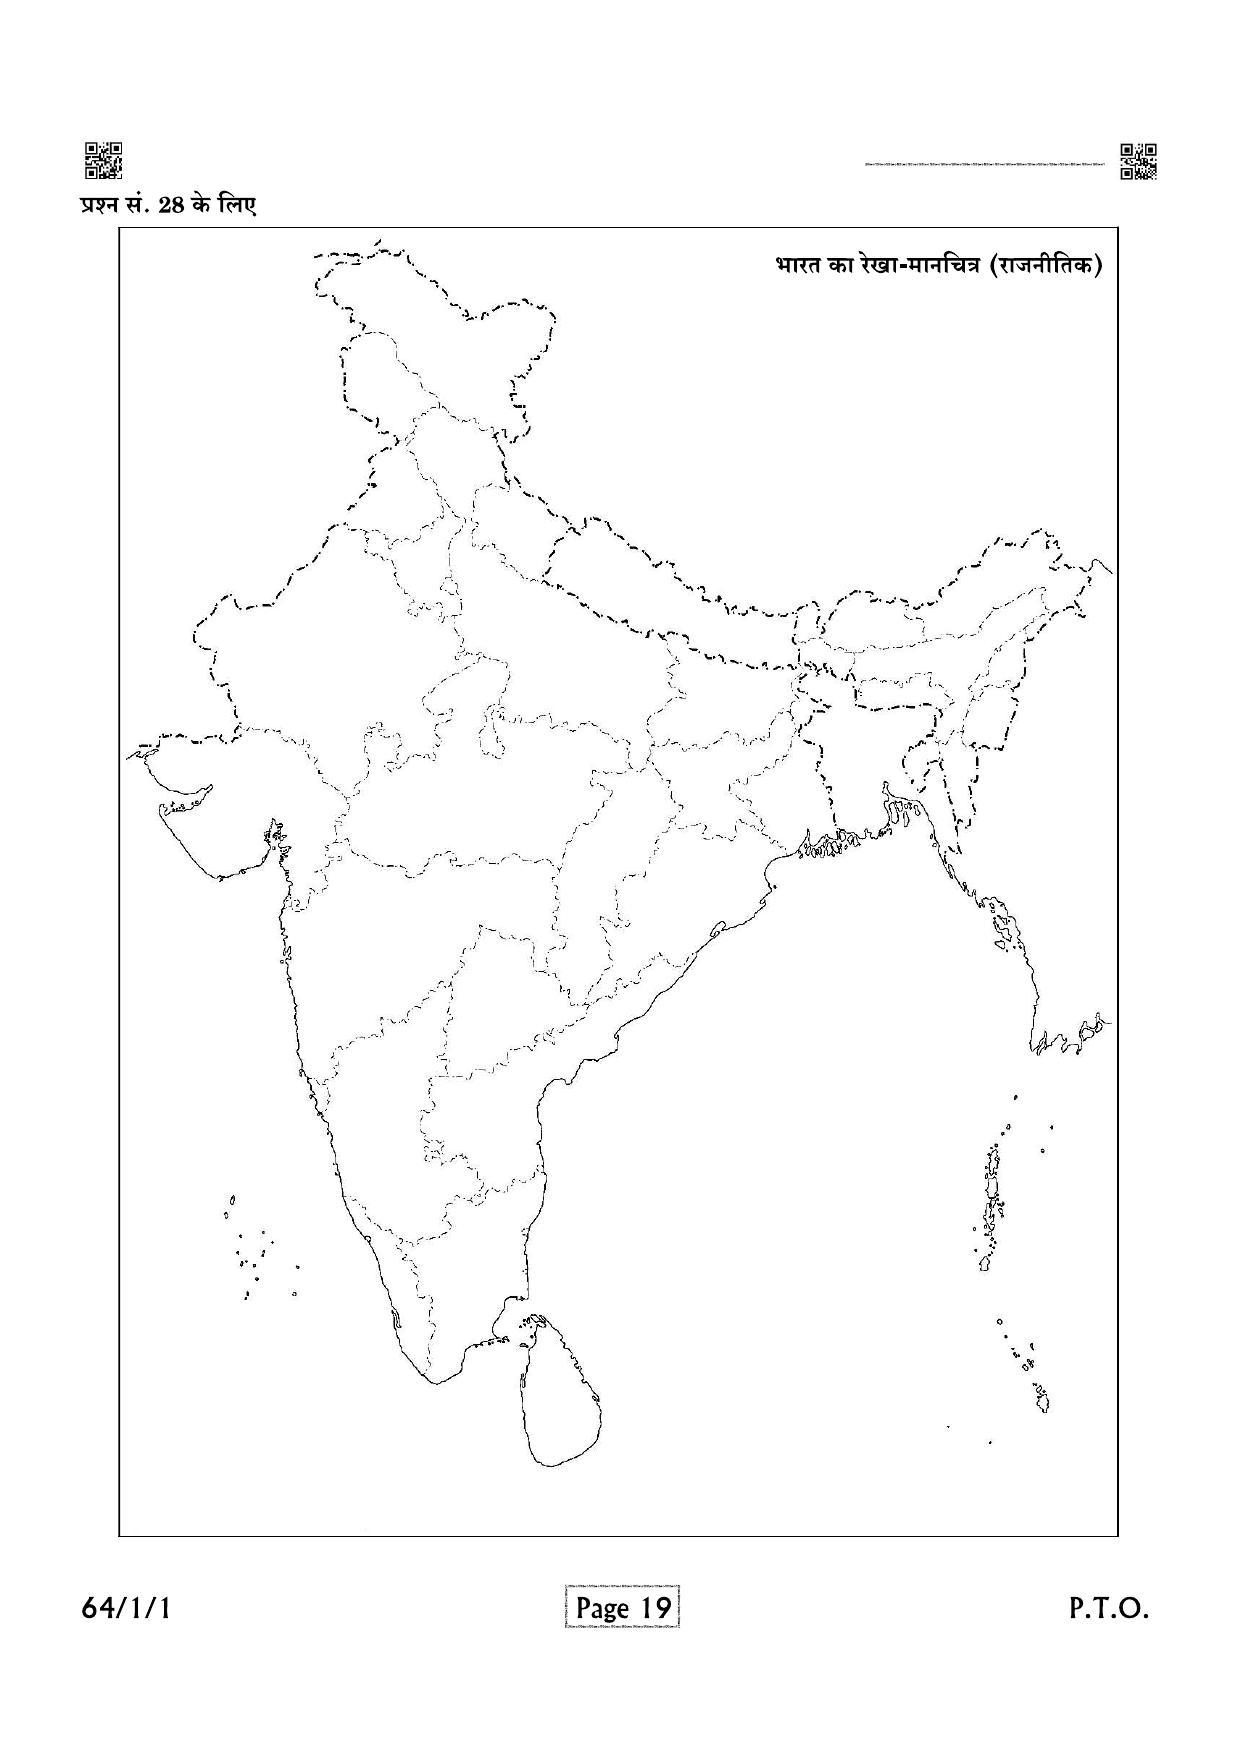 CBSE Class 12 QP_029_Geography 2021 Compartment Question Paper - Page 19